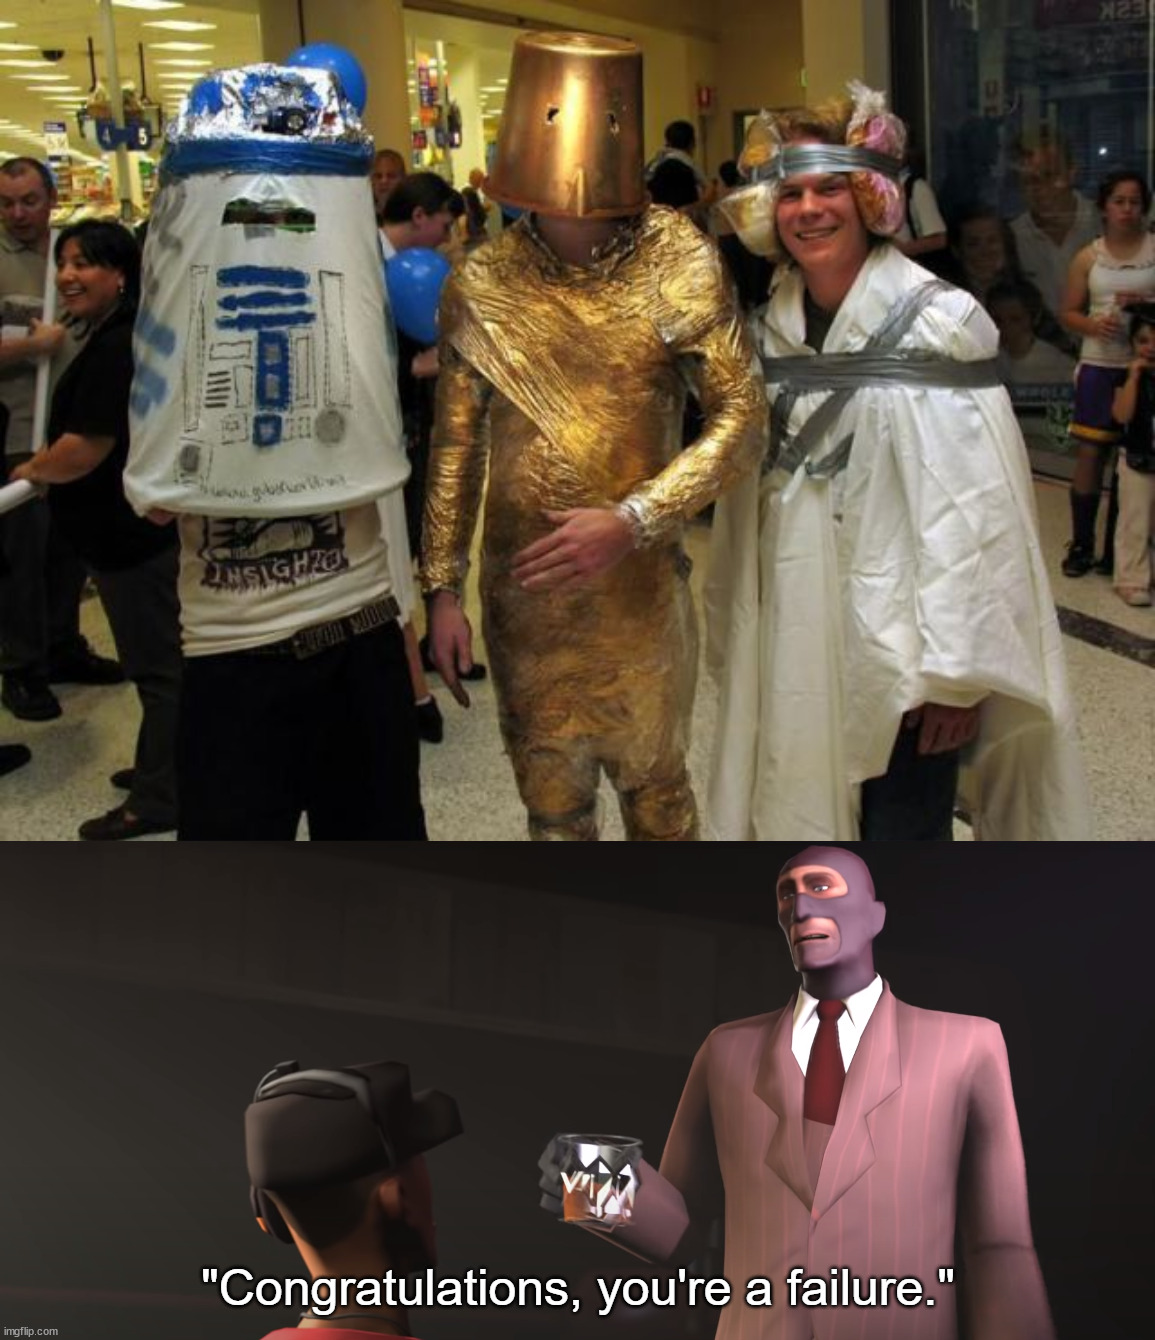 Hard fail. | image tagged in congratulations you're a failure,cosplay fail | made w/ Imgflip meme maker